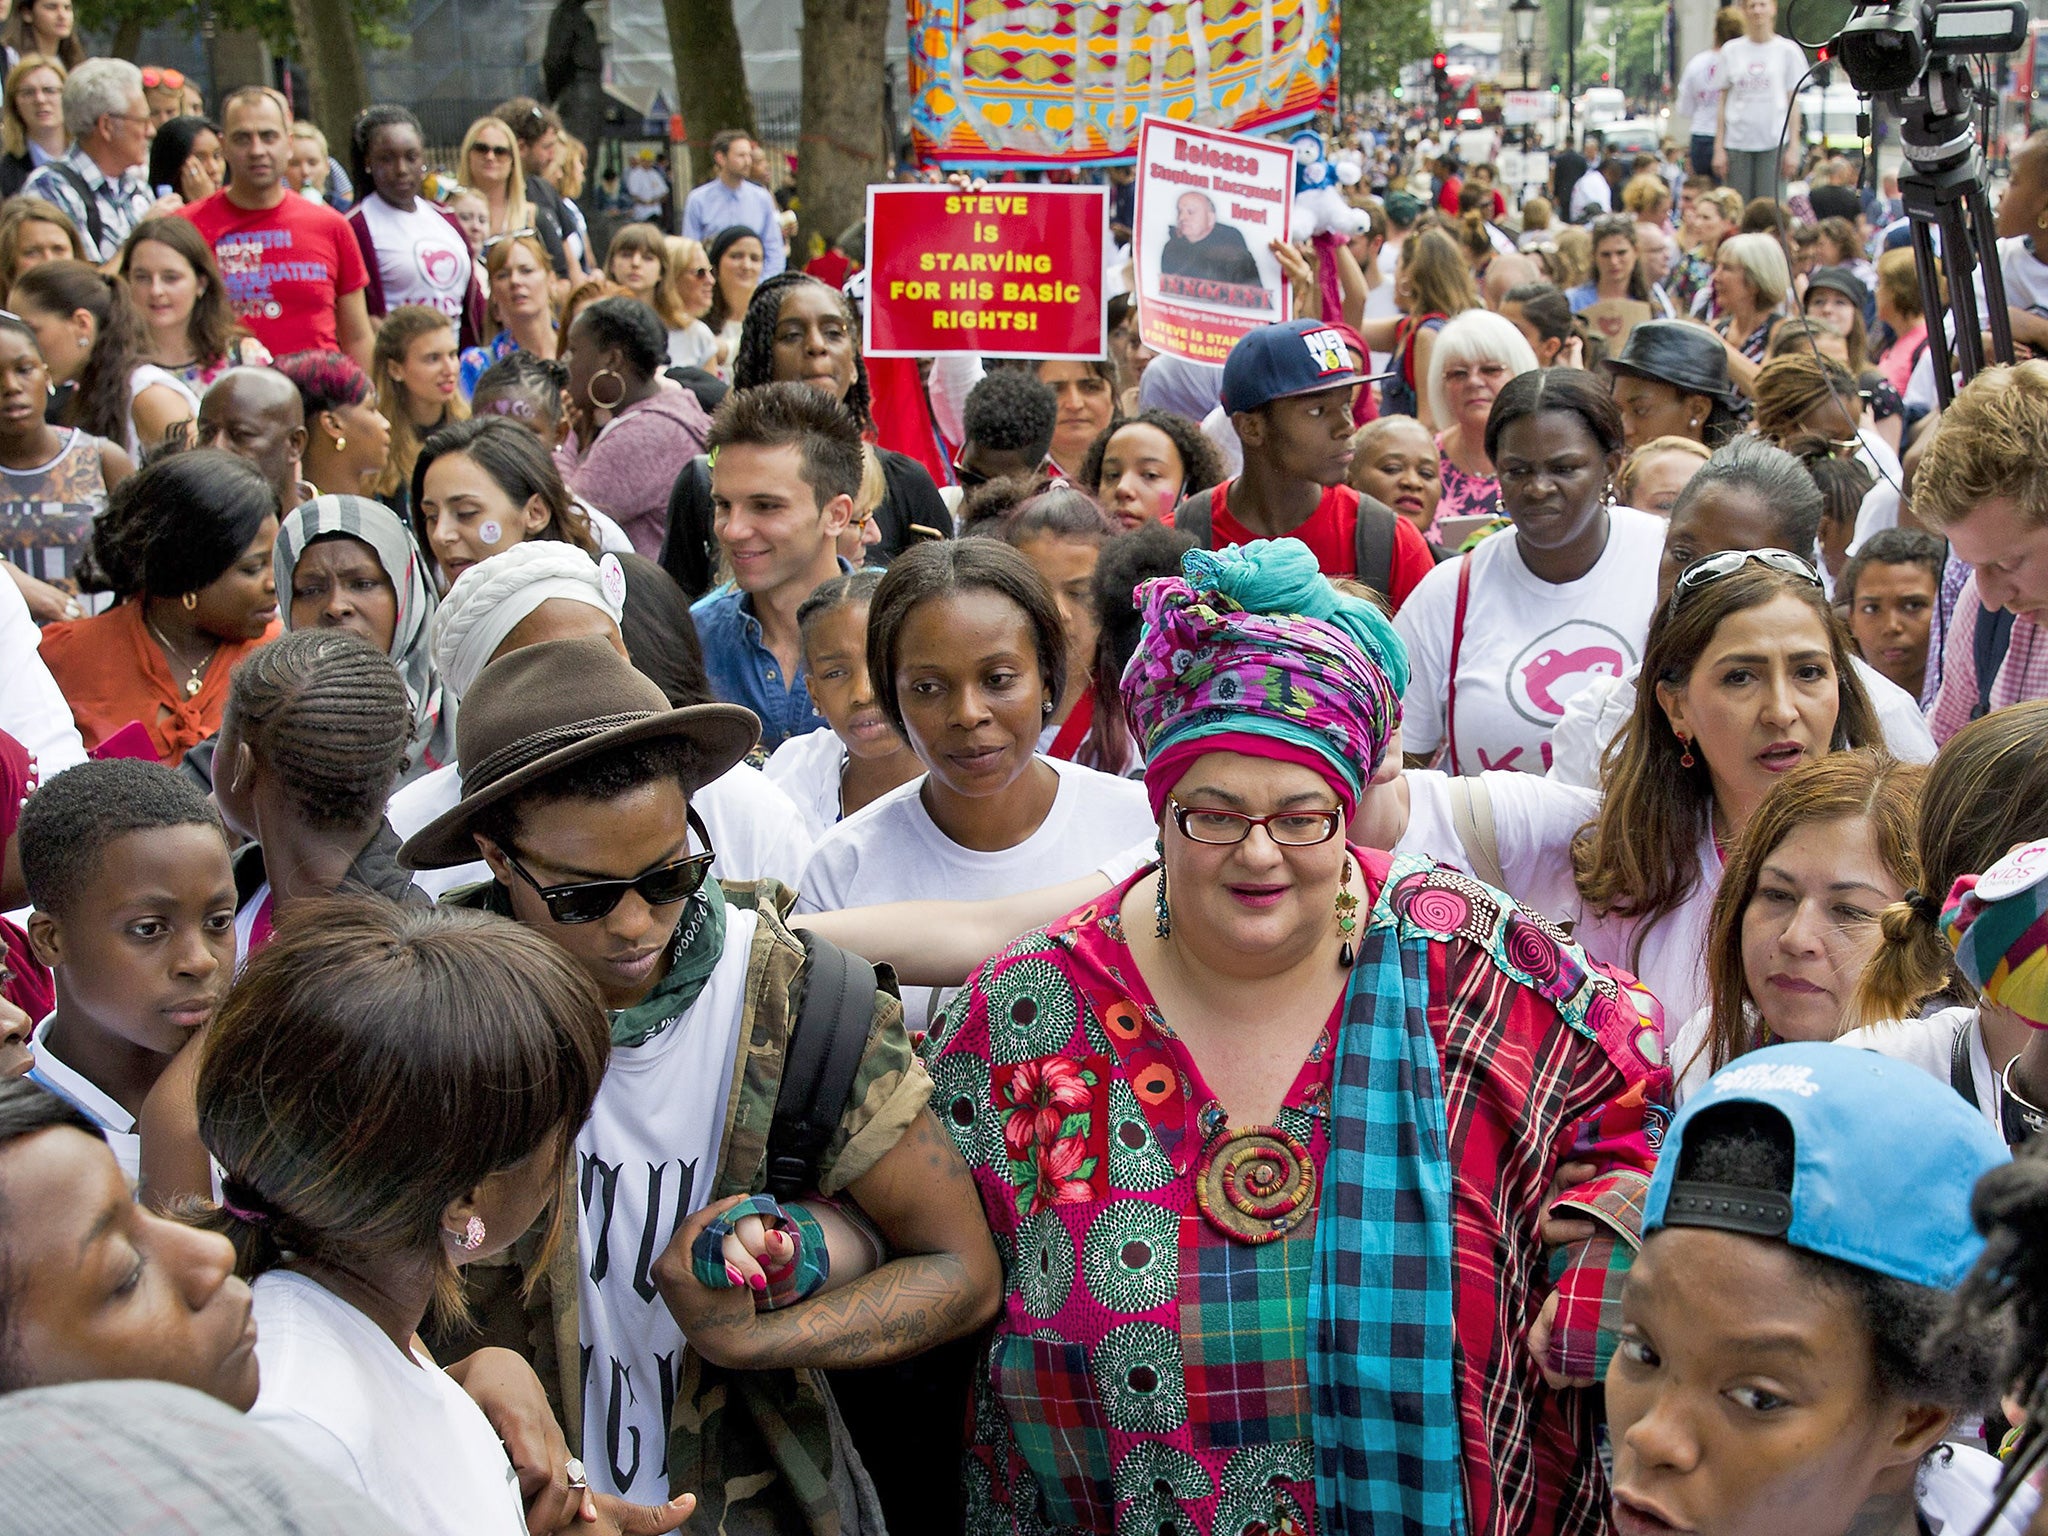 Iranian-born British charity executive Camila Batmanghelidjh (centre), founder of the children's charity Kids Company, leaves surrounded by supporters after speaking at a protest over the closure of Kids Company outside Downing Street in London